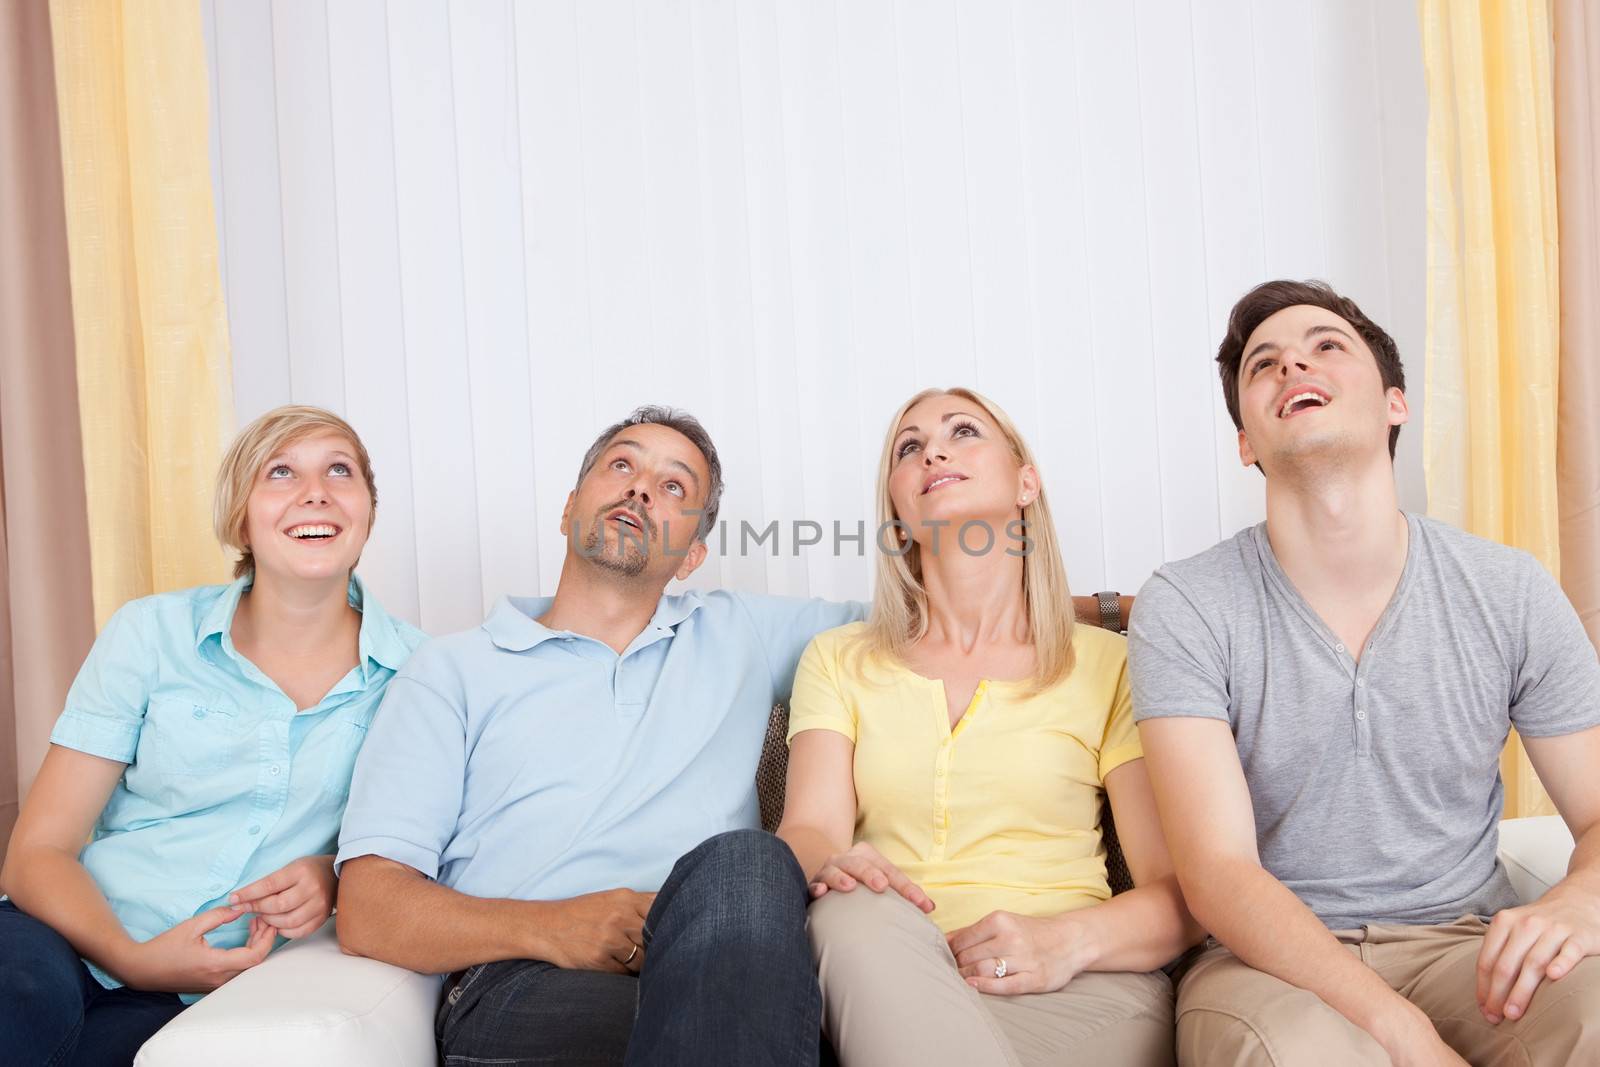 Smiling family in group portrait by AndreyPopov